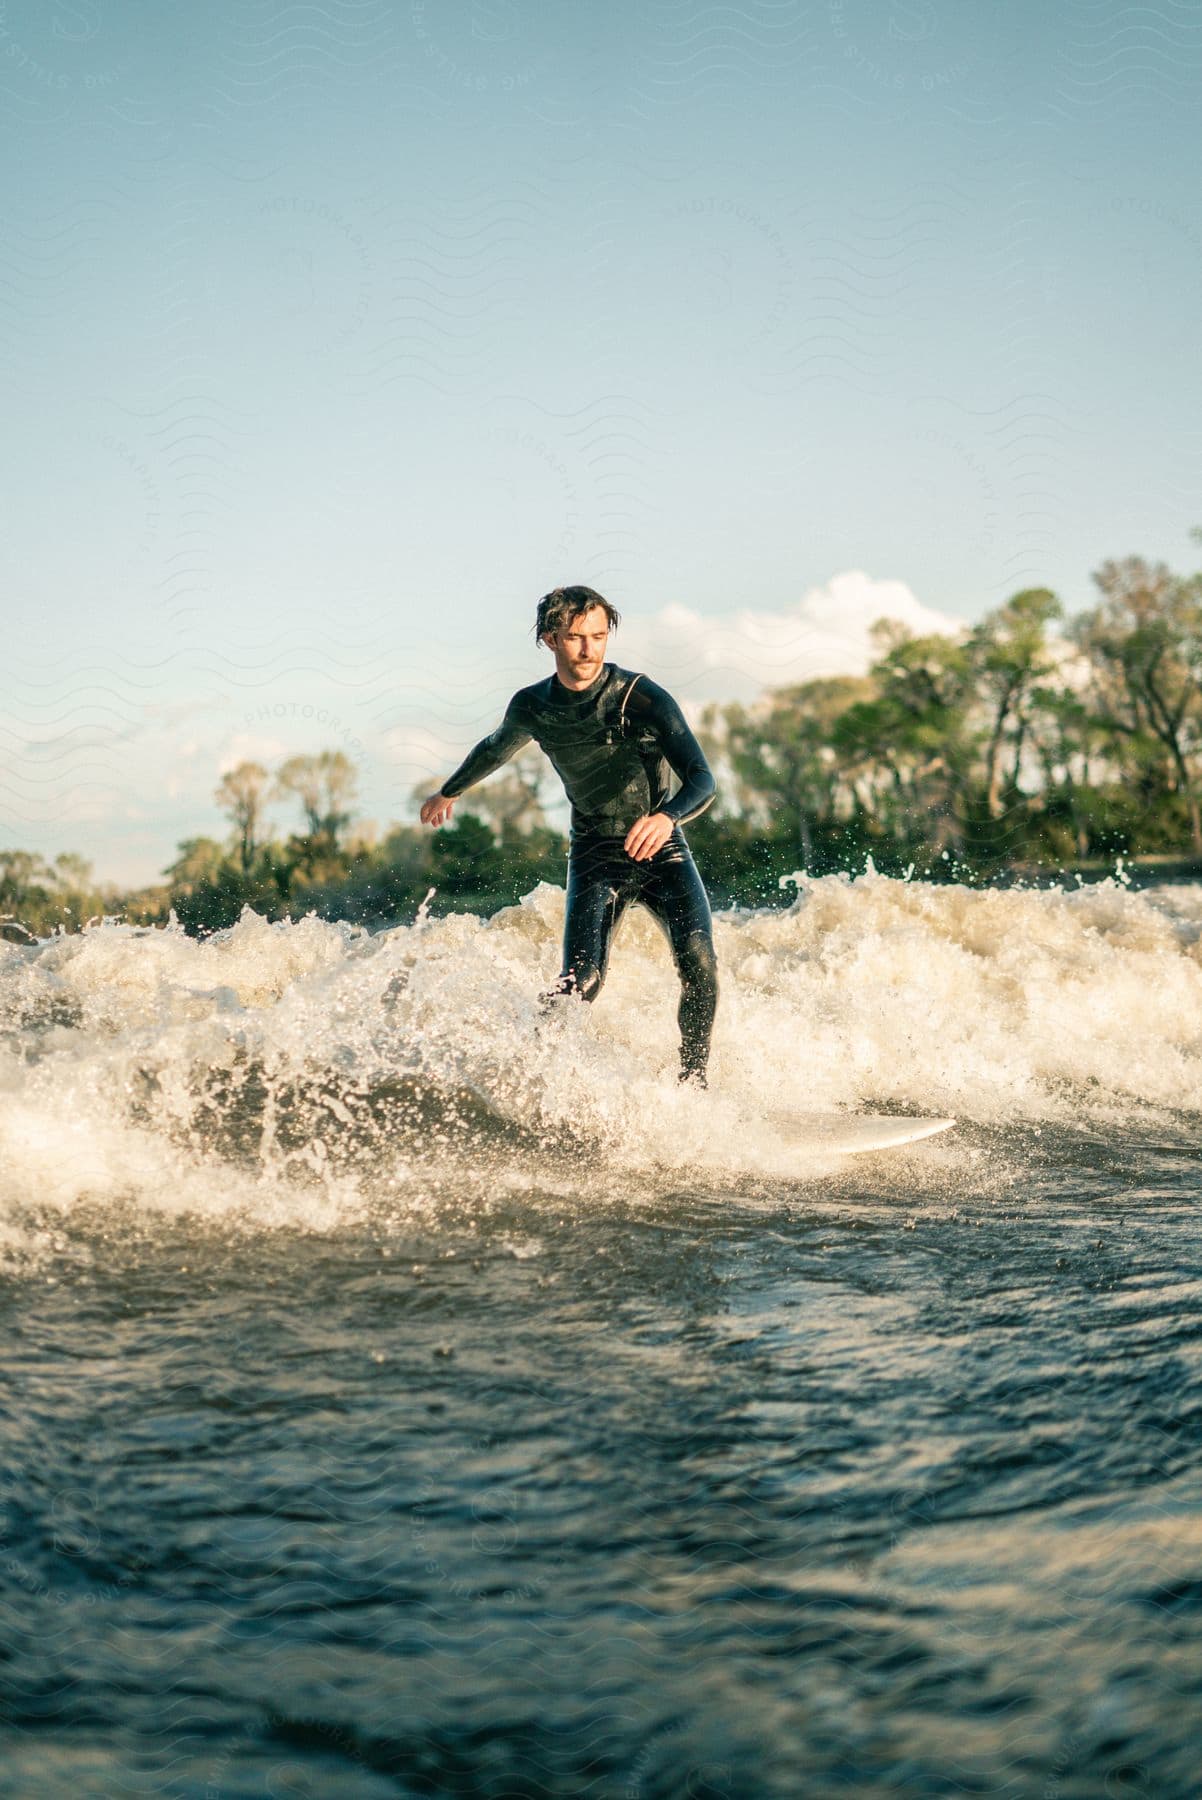 A man wearing a wetsuit surfing a small wave on a sunny day in nature